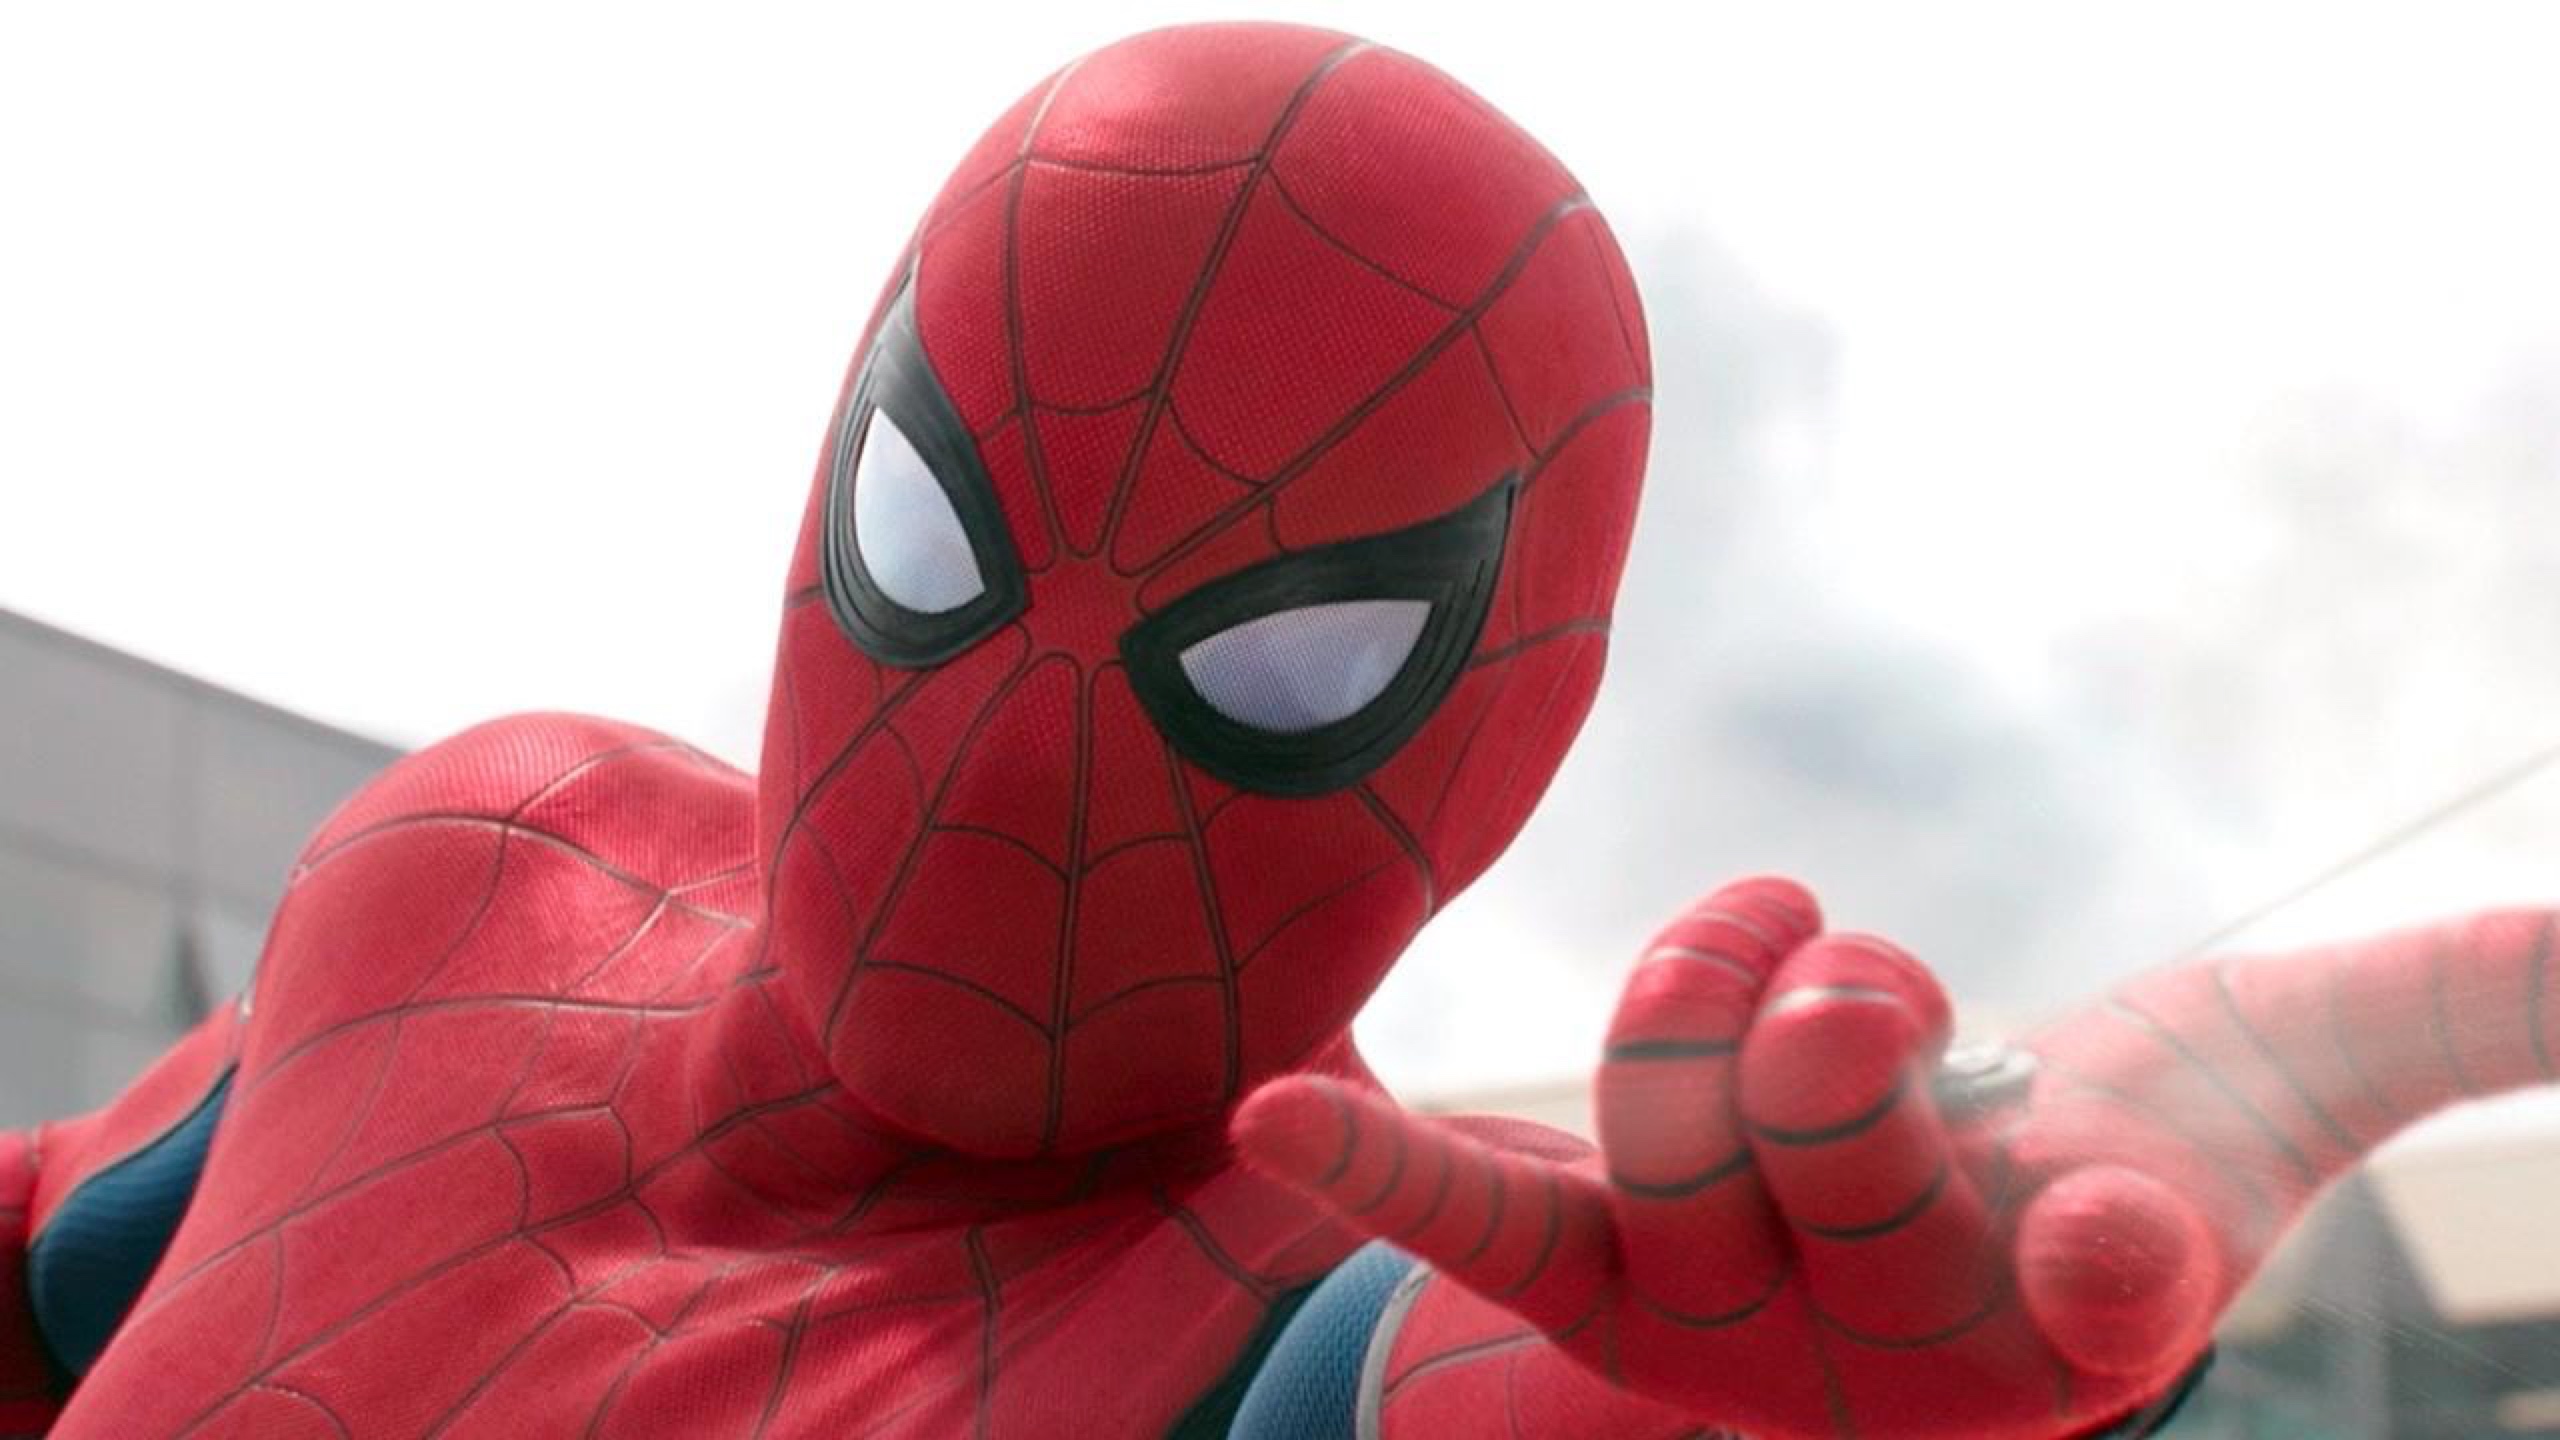 What MCU movie did Spider-Man (Tom Holland) first appear in?